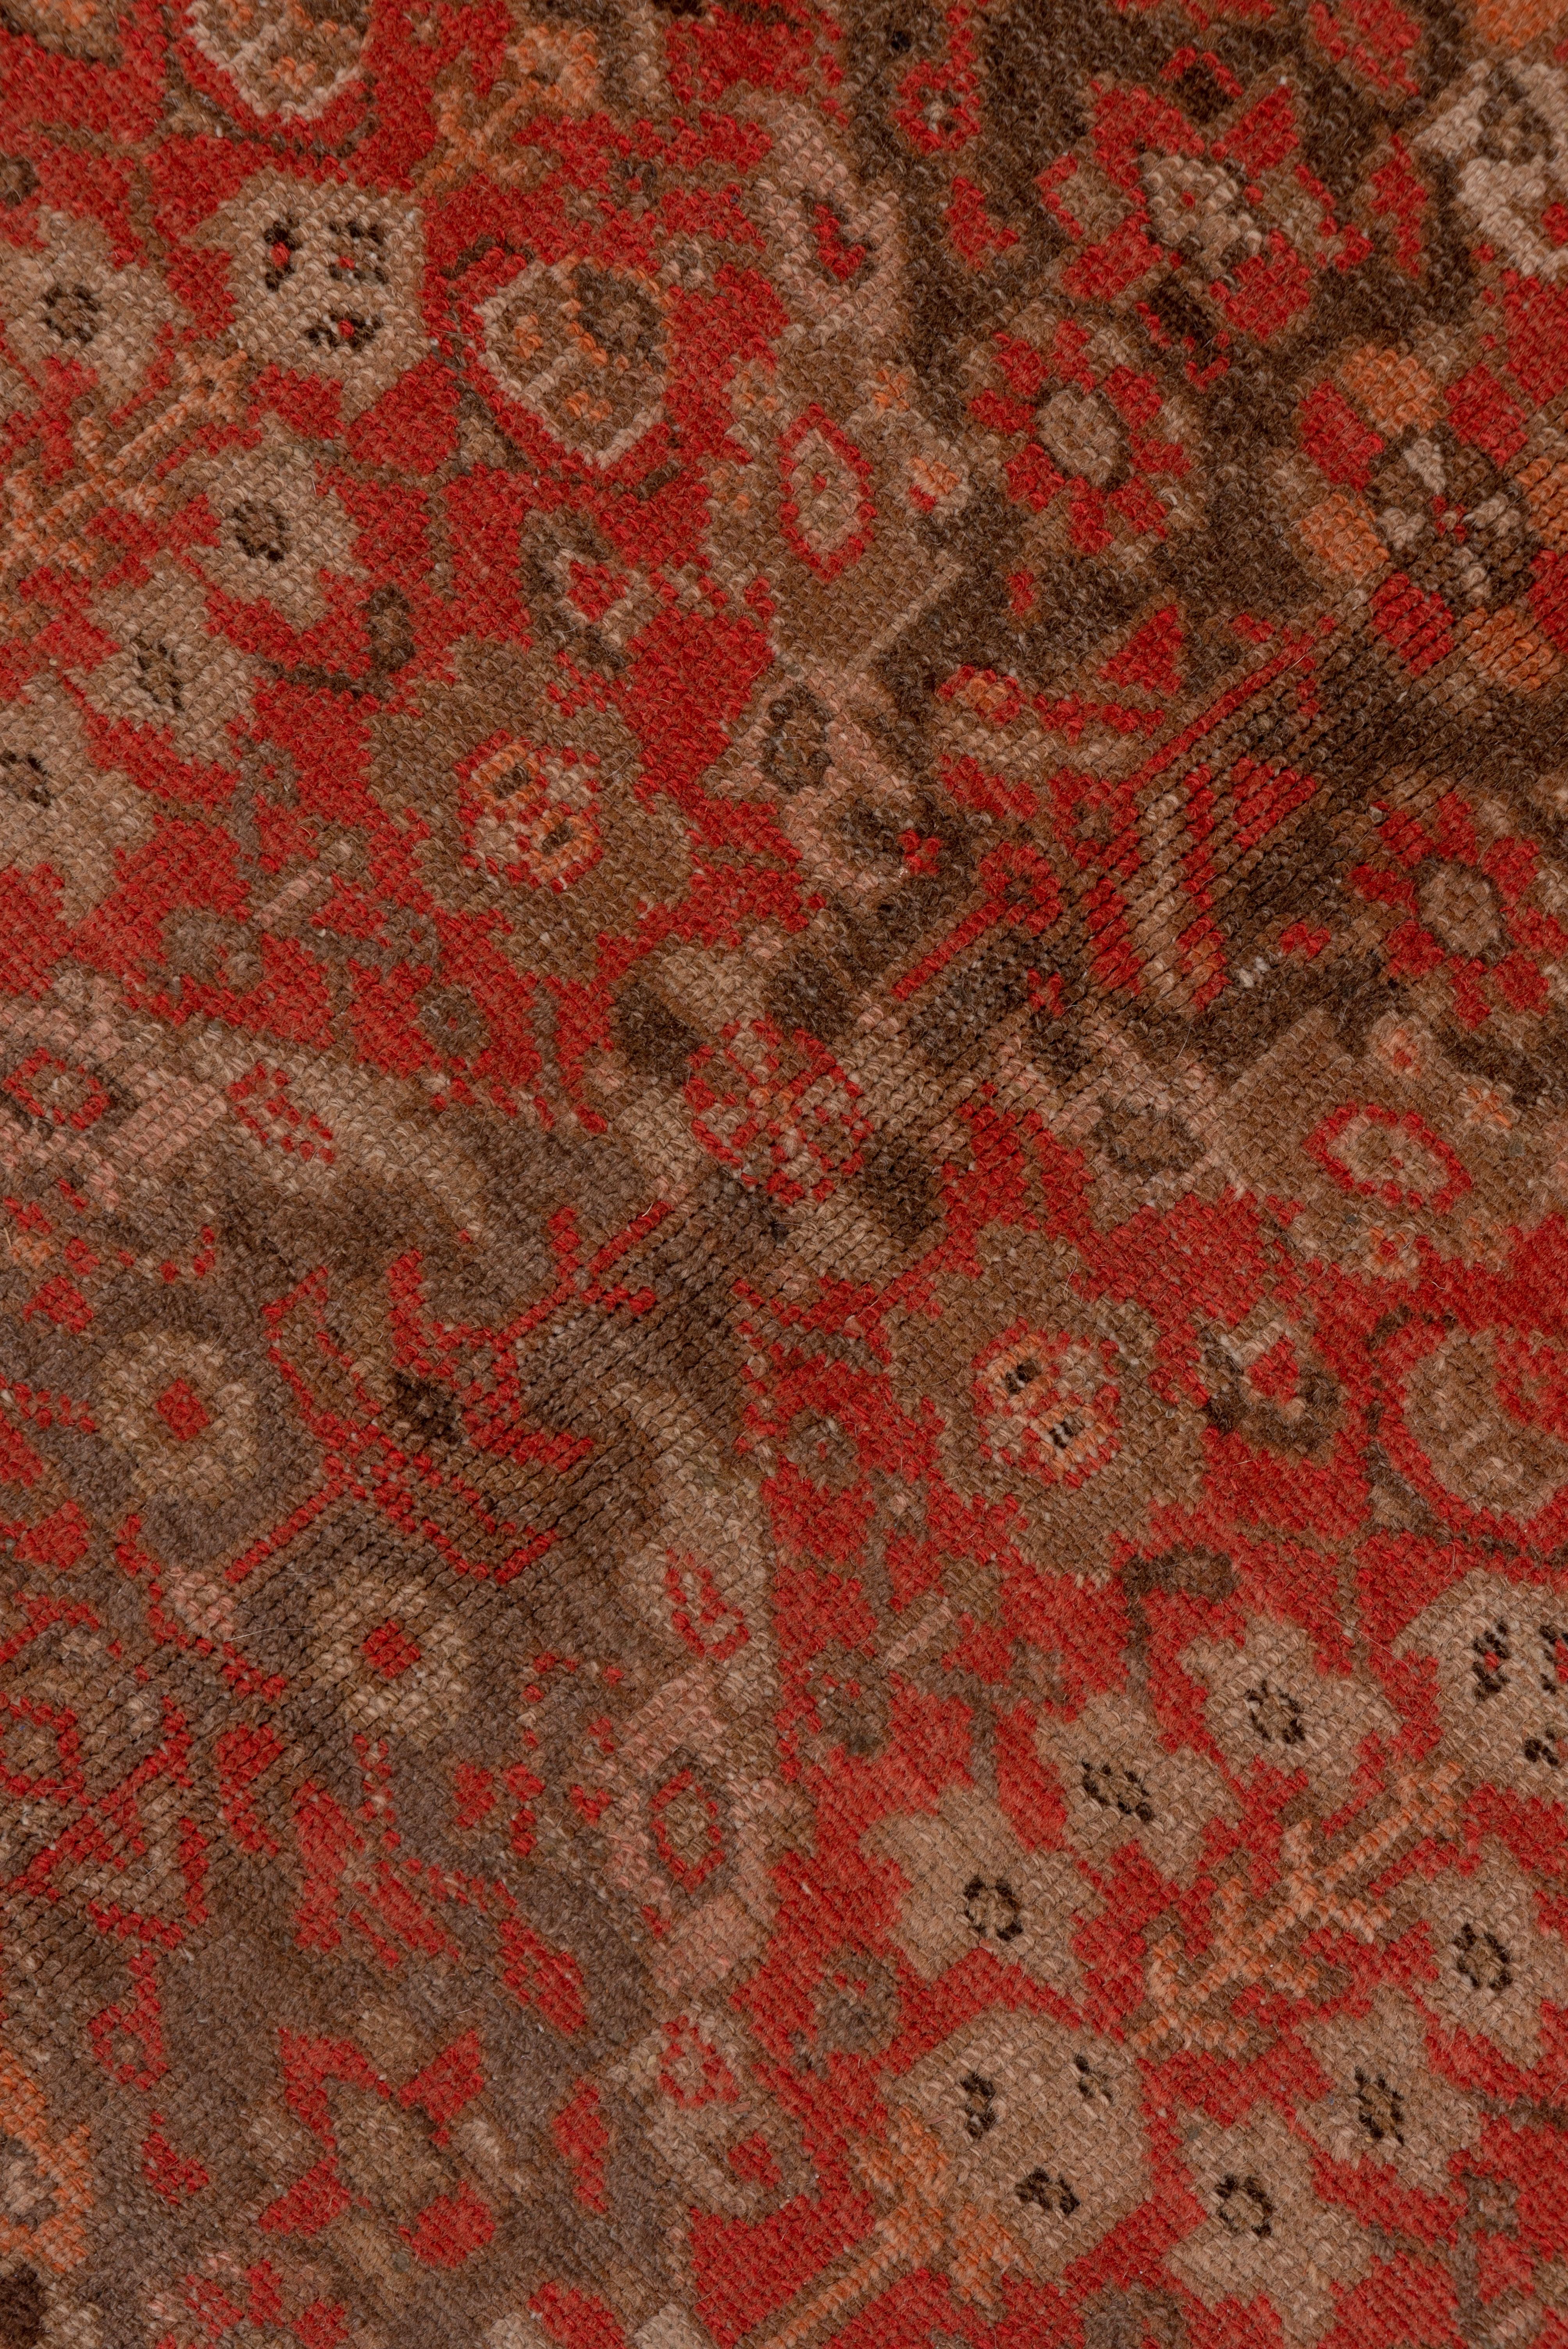 Mid-20th Century Antique Persian Malayer Gallery Rug, Red and Brown Field, Coral Tones For Sale